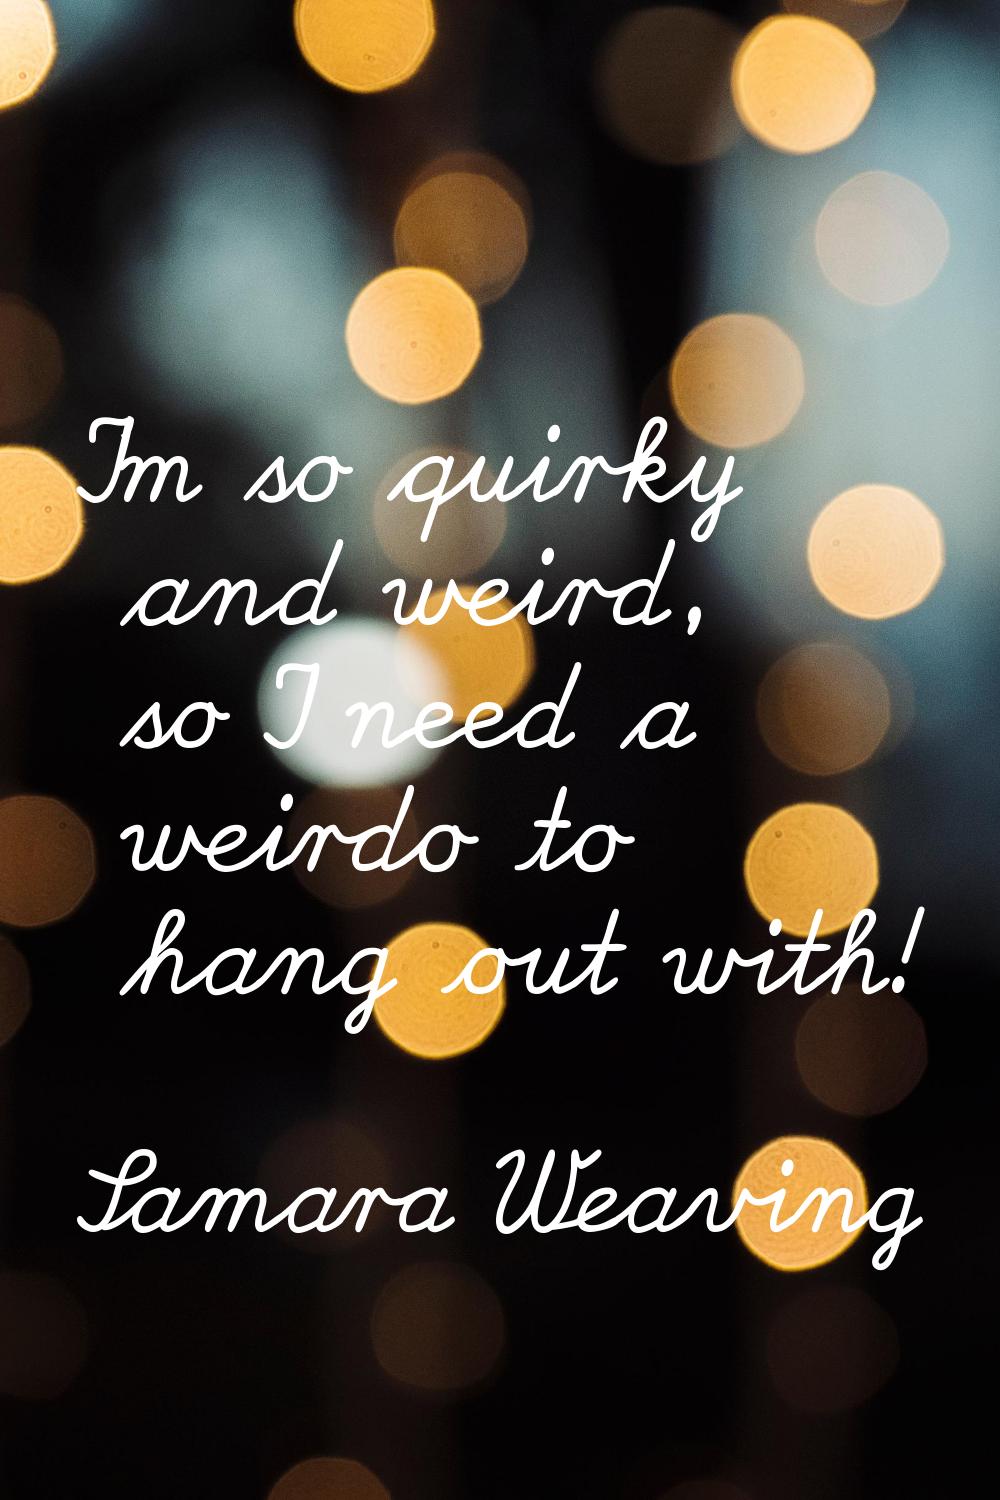 I'm so quirky and weird, so I need a weirdo to hang out with!